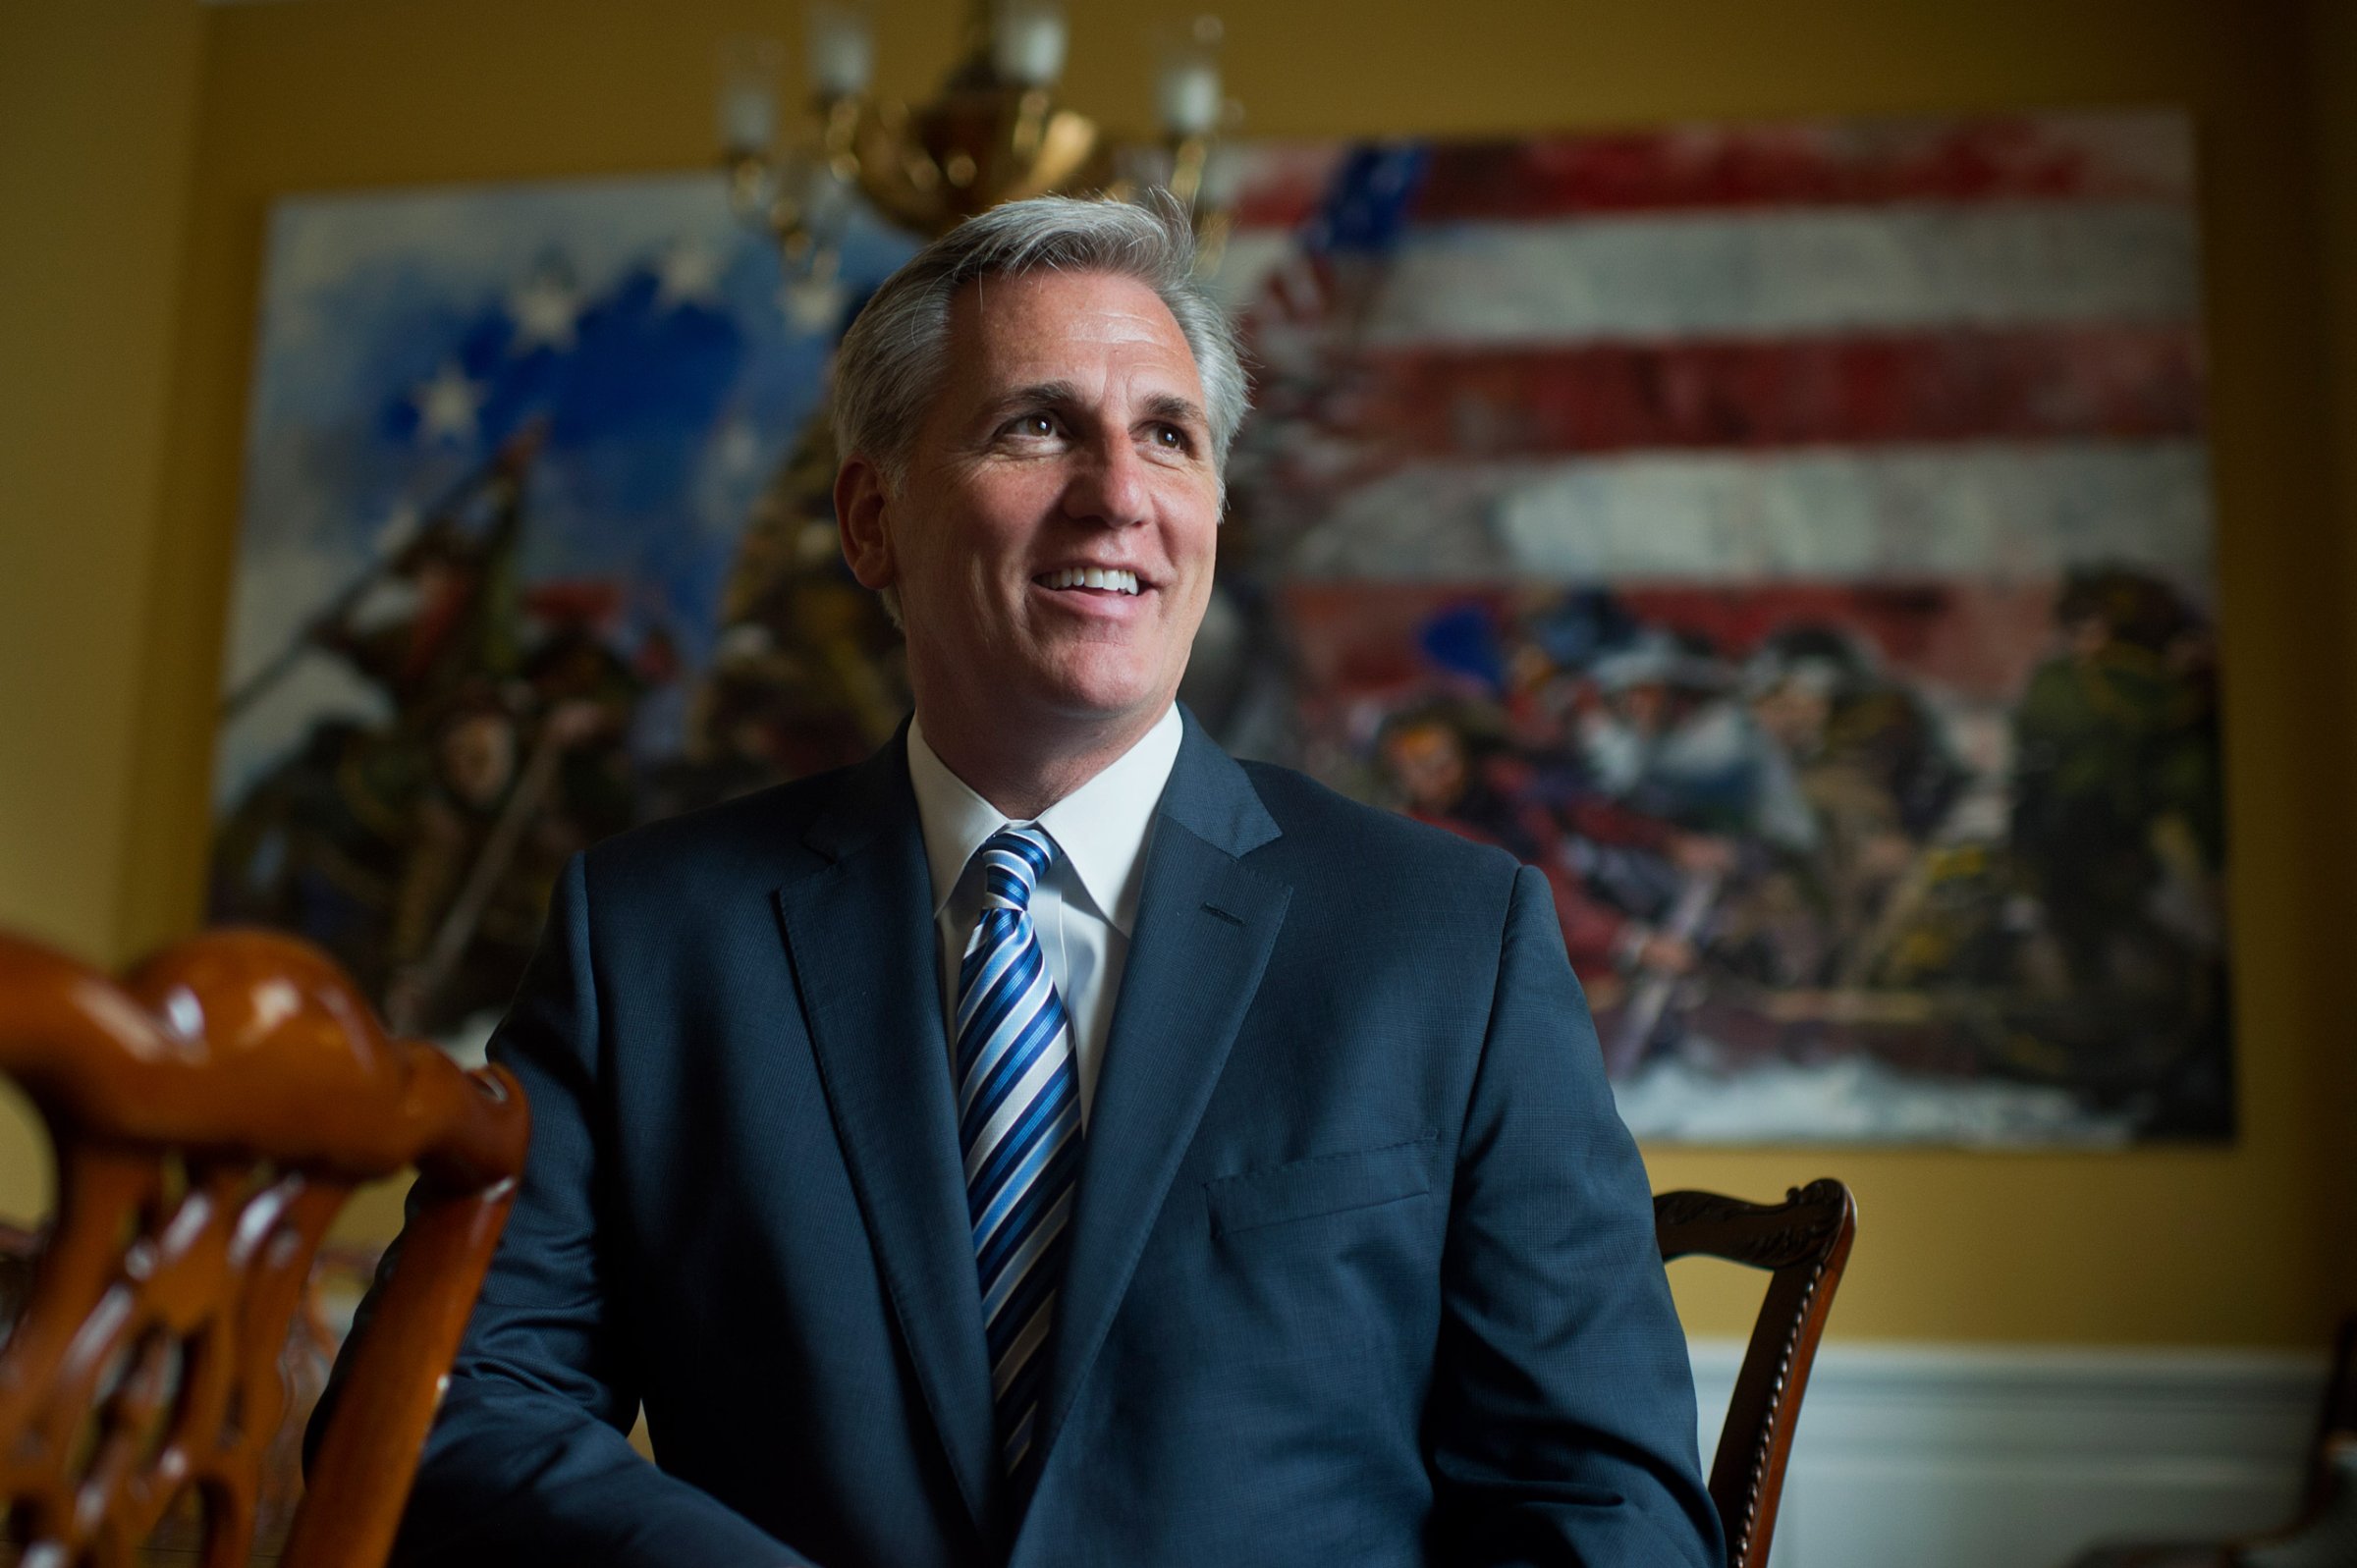 UNITED STATES - JUNE 04: House Majority Leader Kevin McCarthy, D-Calif., is photographed in his Capitol office, June 4, 2015. (Photo By Tom Williams/CQ Roll Call) (CQ Roll Call via AP Images)